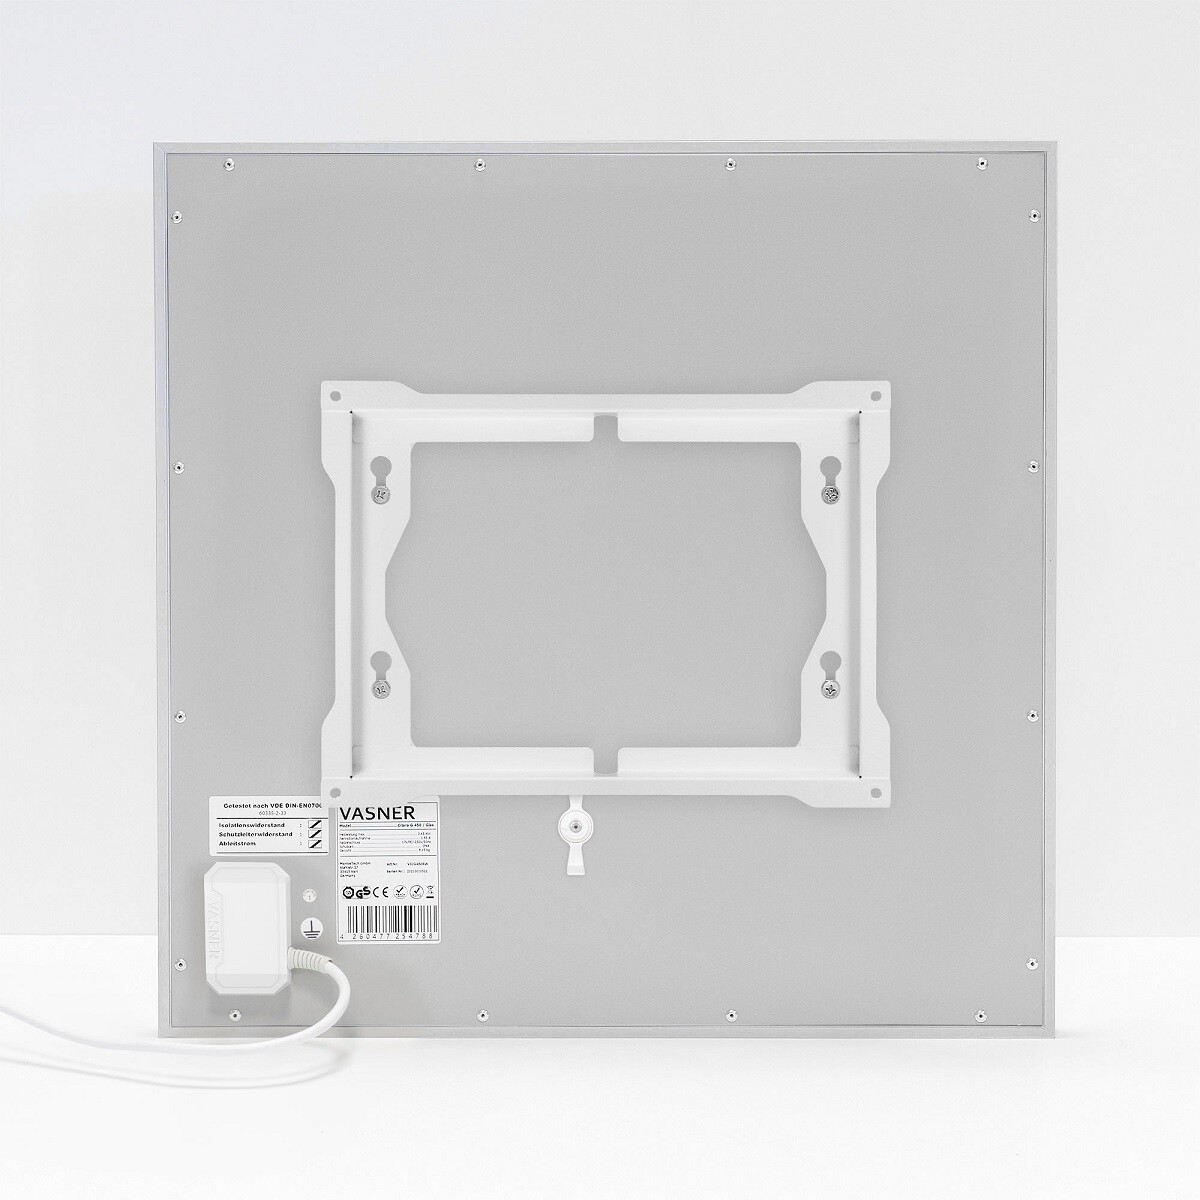 Bracket of the wall mounted glass heater